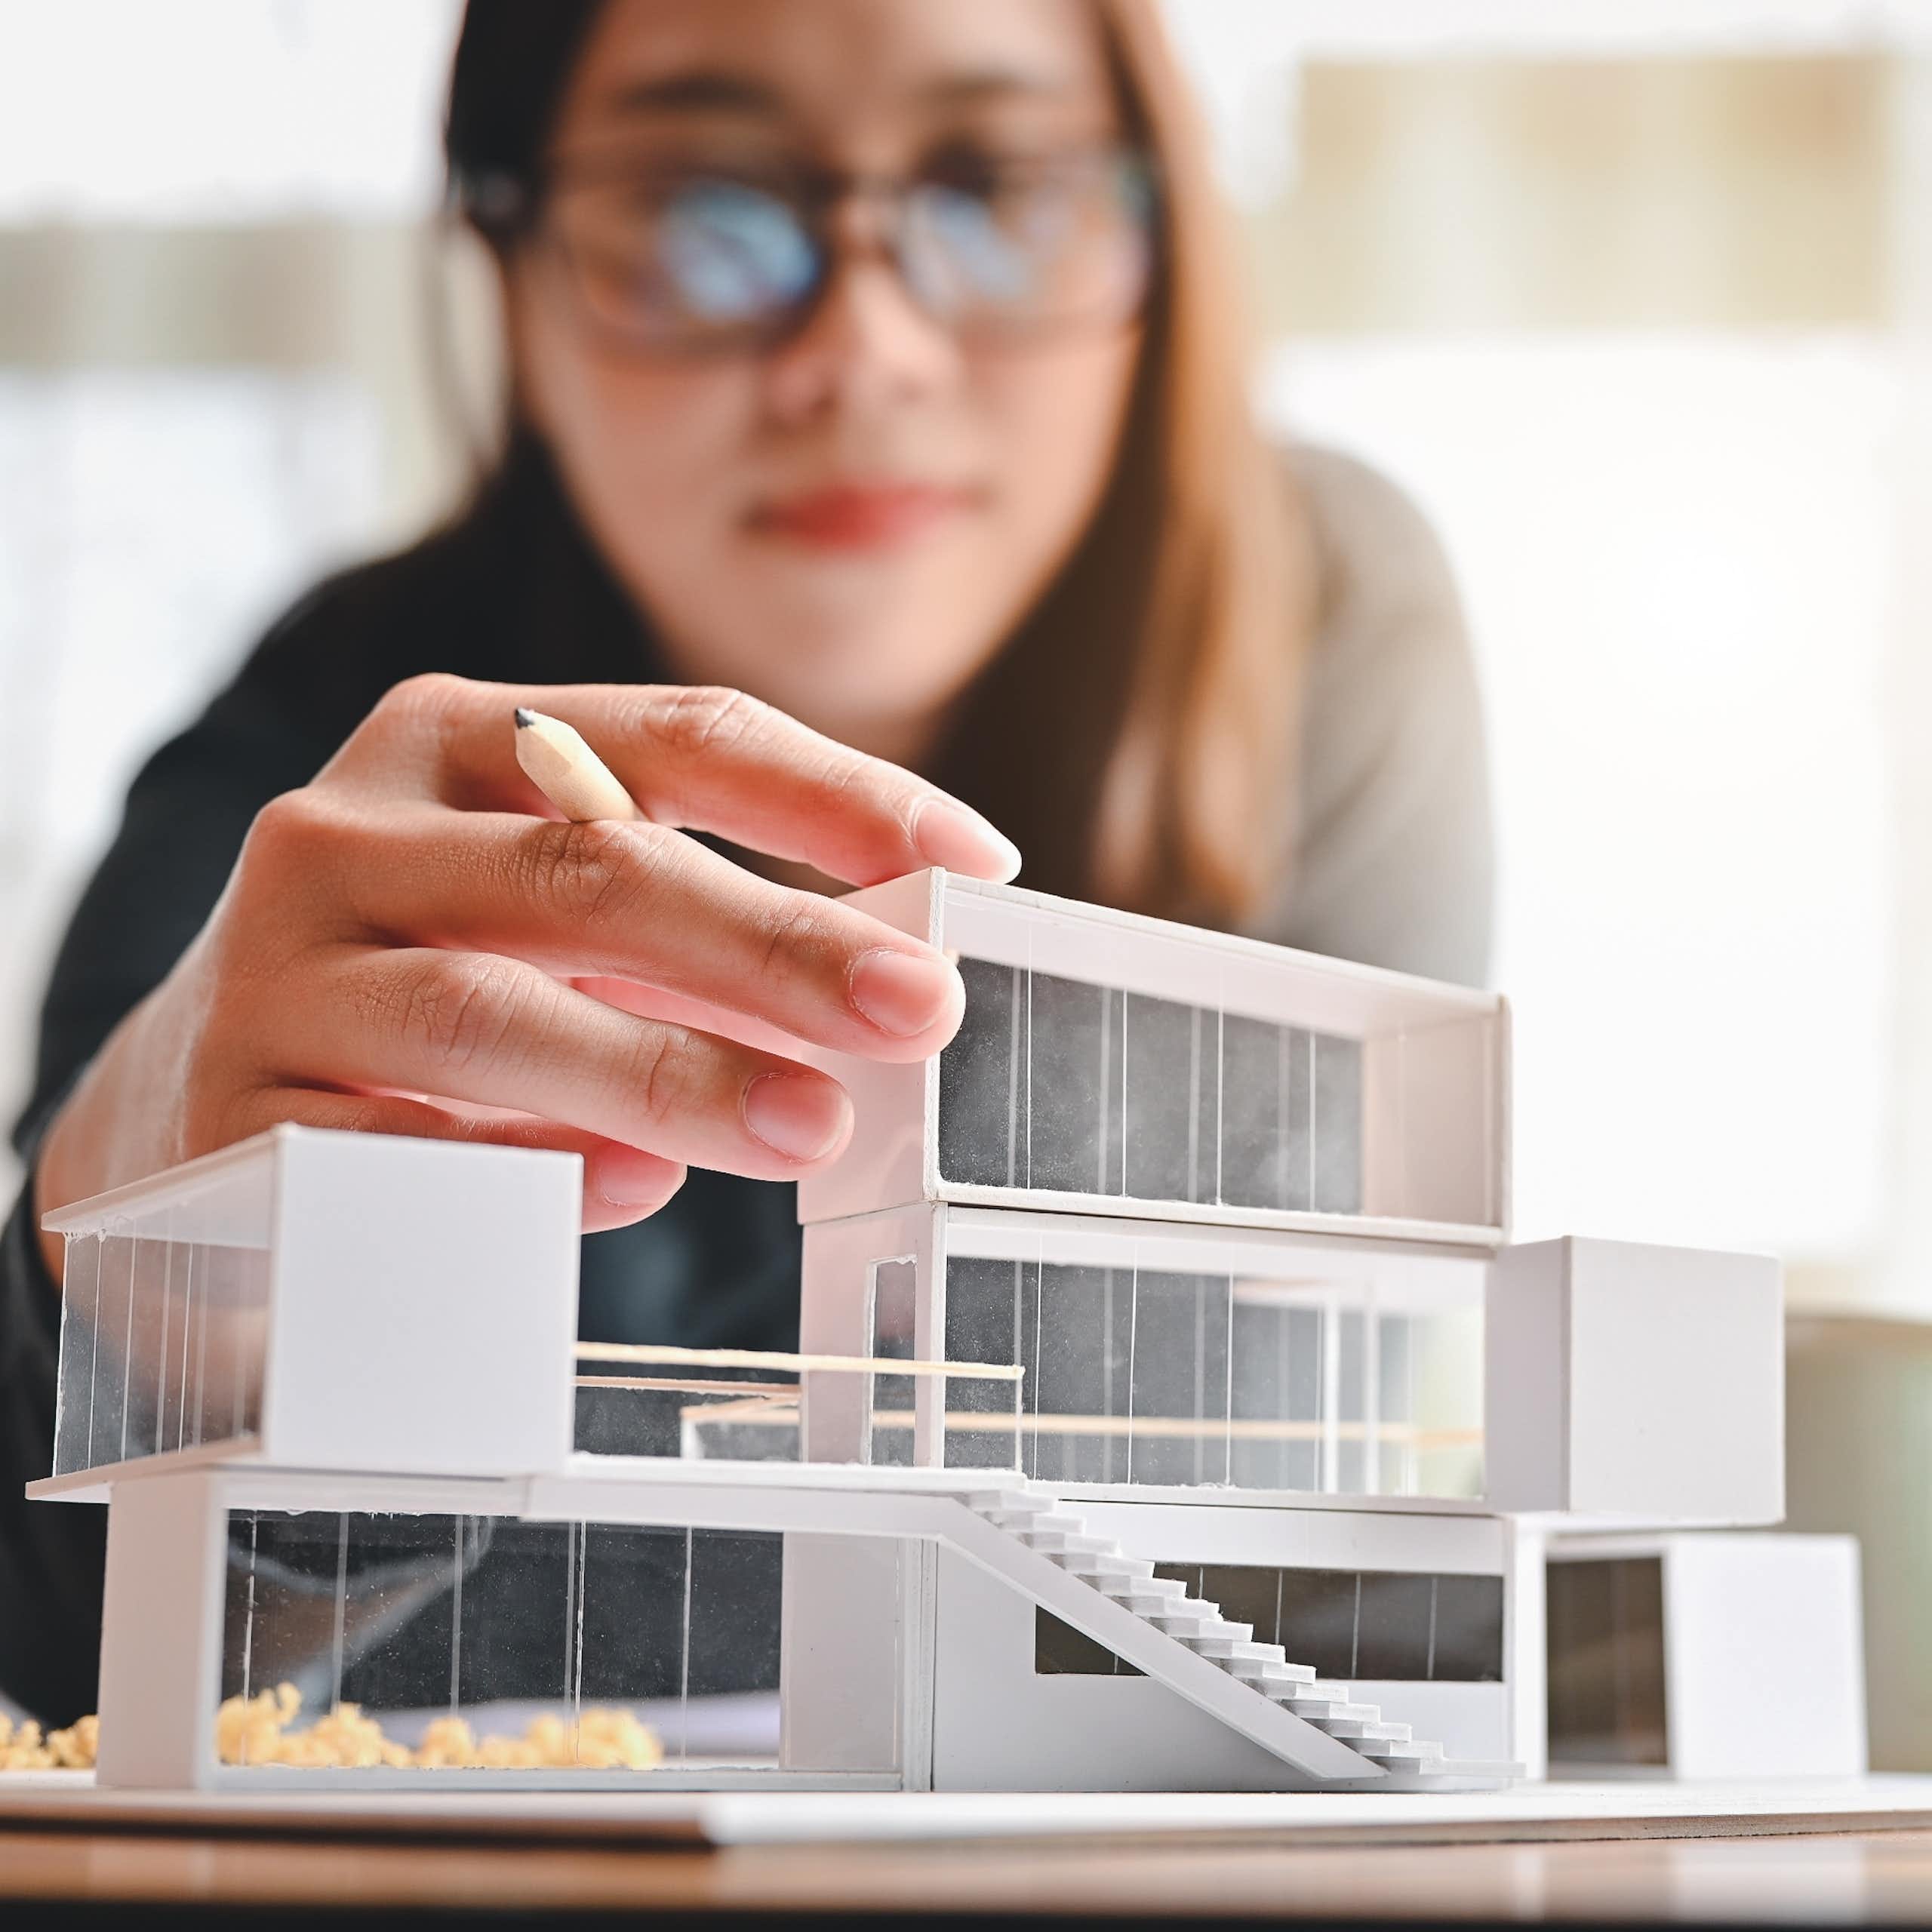 Woman builds an architectural model